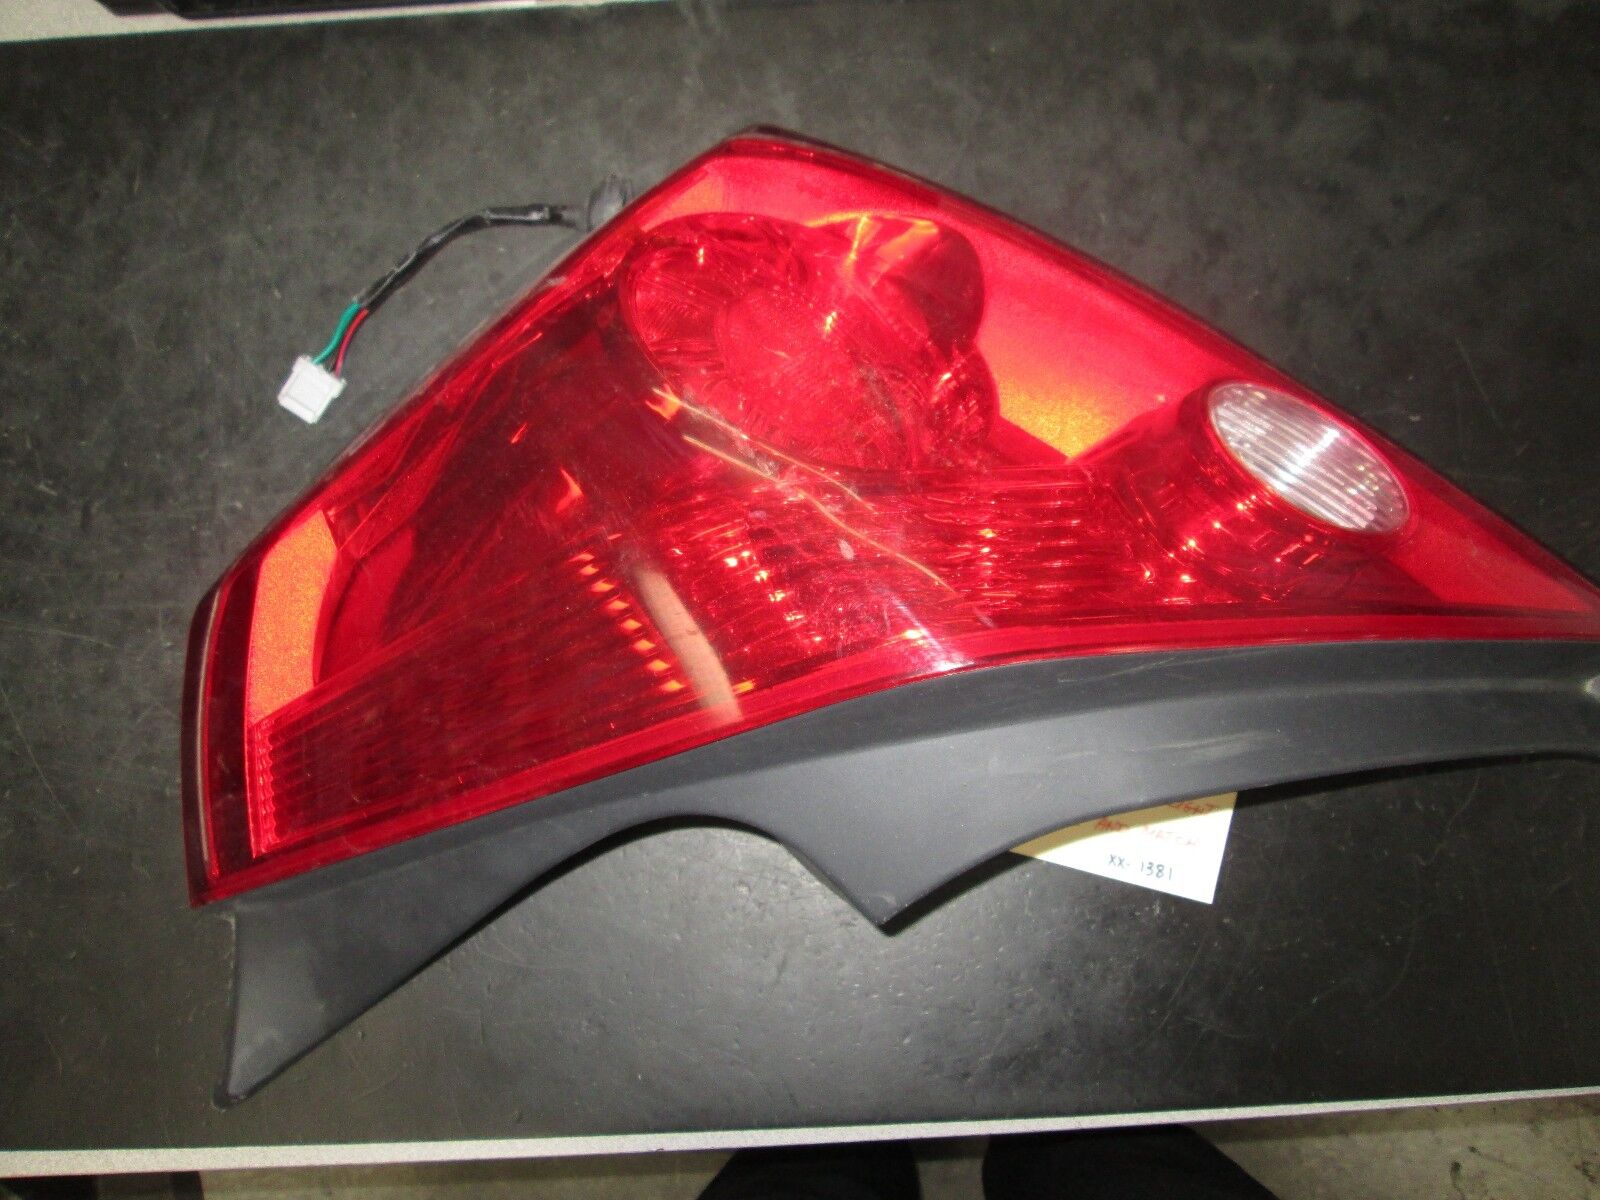 08 09 10 11 12 13 NISSAN ALTIMA LIGHT TAIL RIGH OEM SIDE Limited price sale Kansas City Mall it See